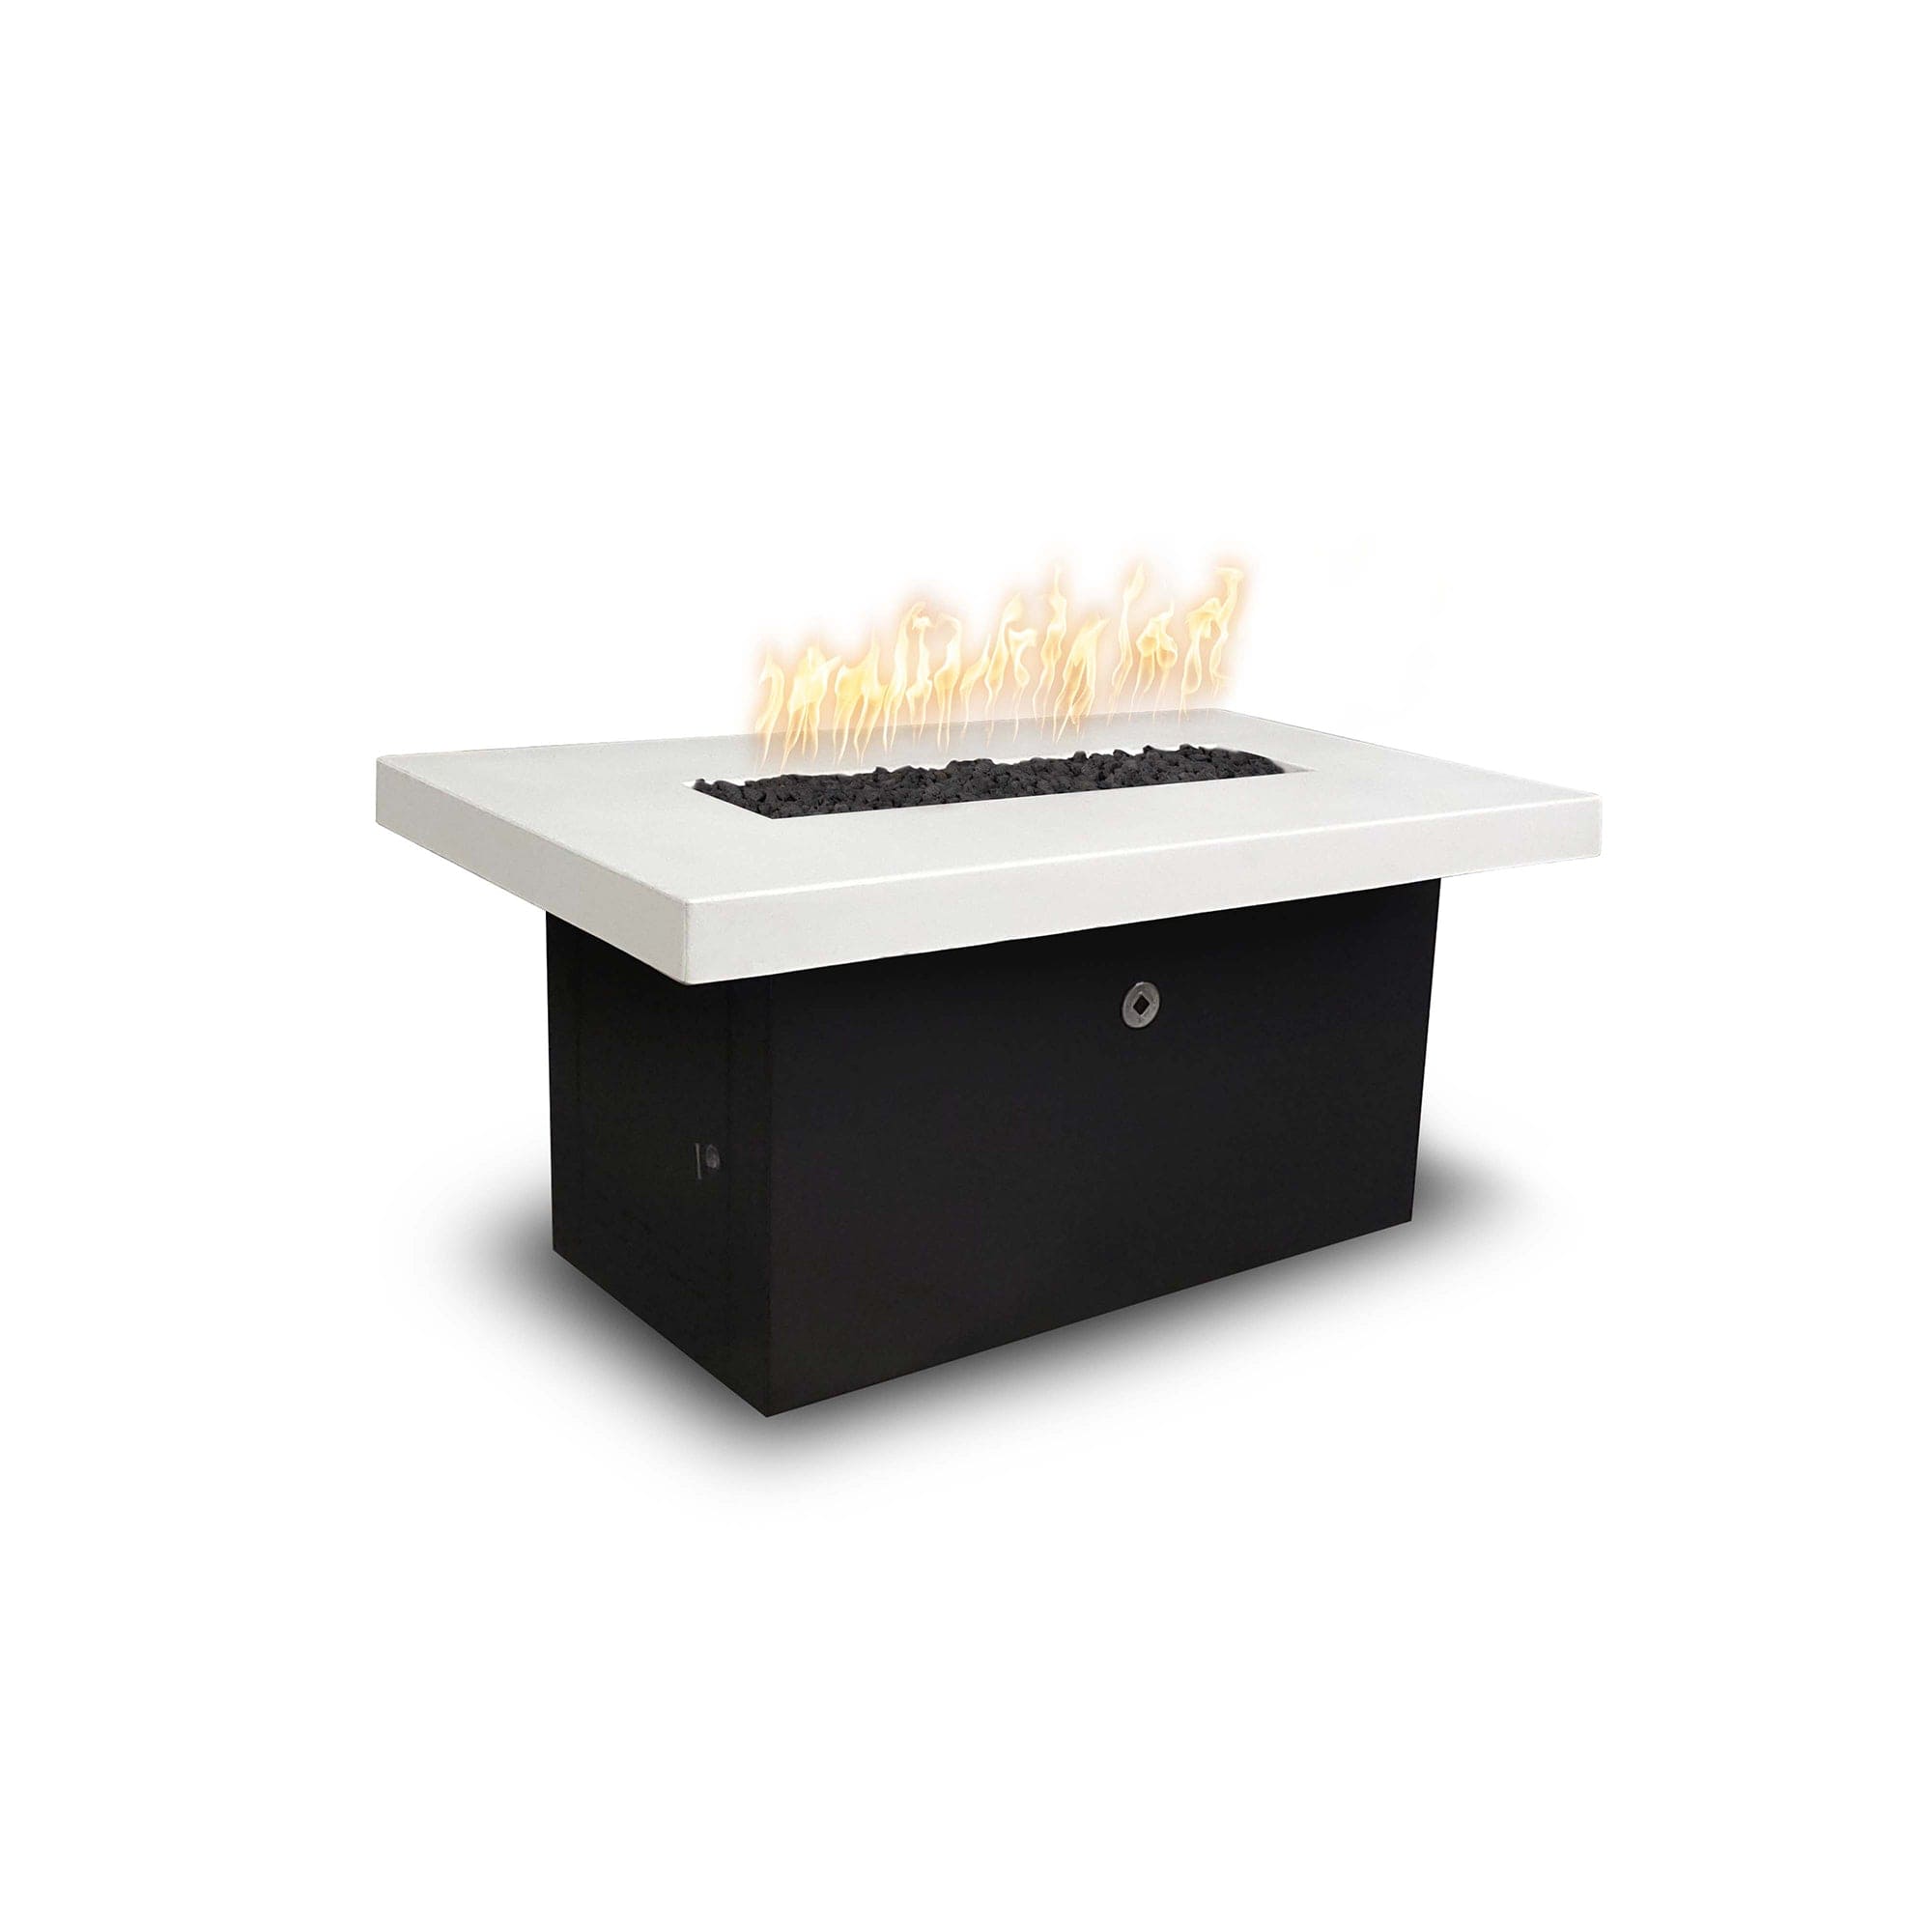 The Outdoor Plus Fire Features The Outdoor Plus 36", 48", 60", 72" Alberta Black & White Fire Table - Powder Coat Base + GFRC Top / OPT-ALBPCxx-BWC, OPT-ALBPCxx-BWCFSML, OPT-ALBPCxx-BWCFSEN, OPT-ALBPCxx-BWCE12V, OPT-ALBPCxx-BWCEKIT